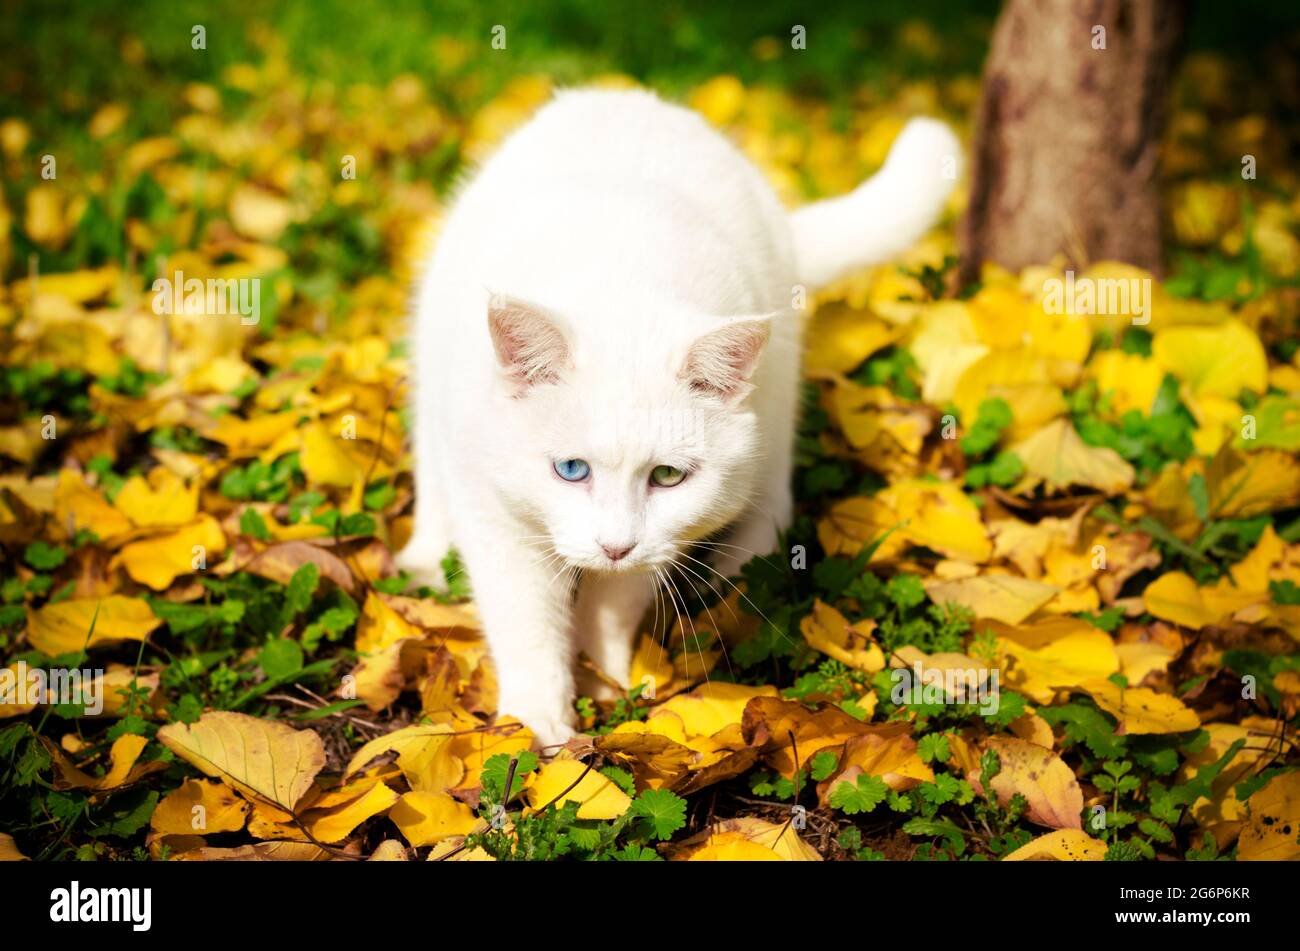 Front view of a white cat walking outdoors in fall foliage Stock Photo